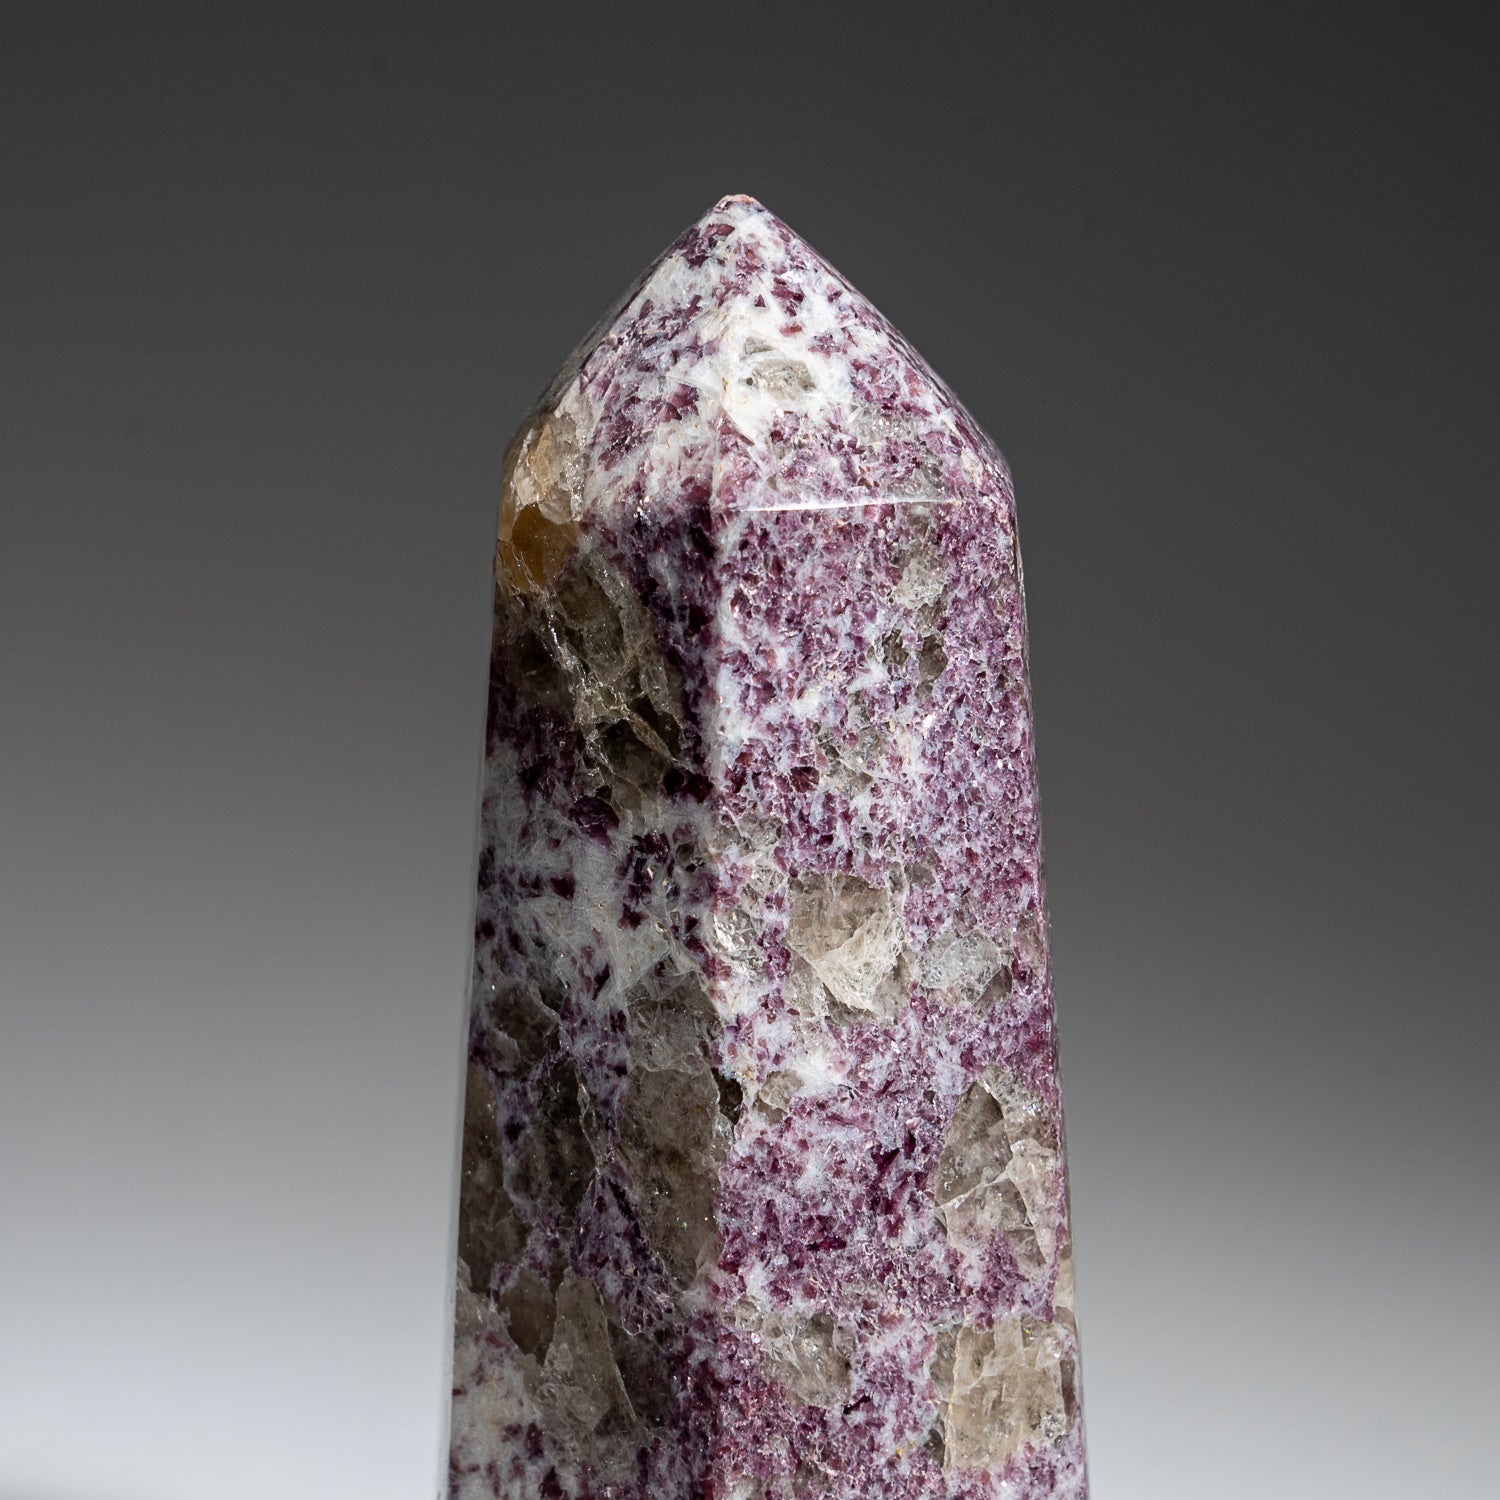 Polished Ruby in Quartz Point from India (1.3 lbs)